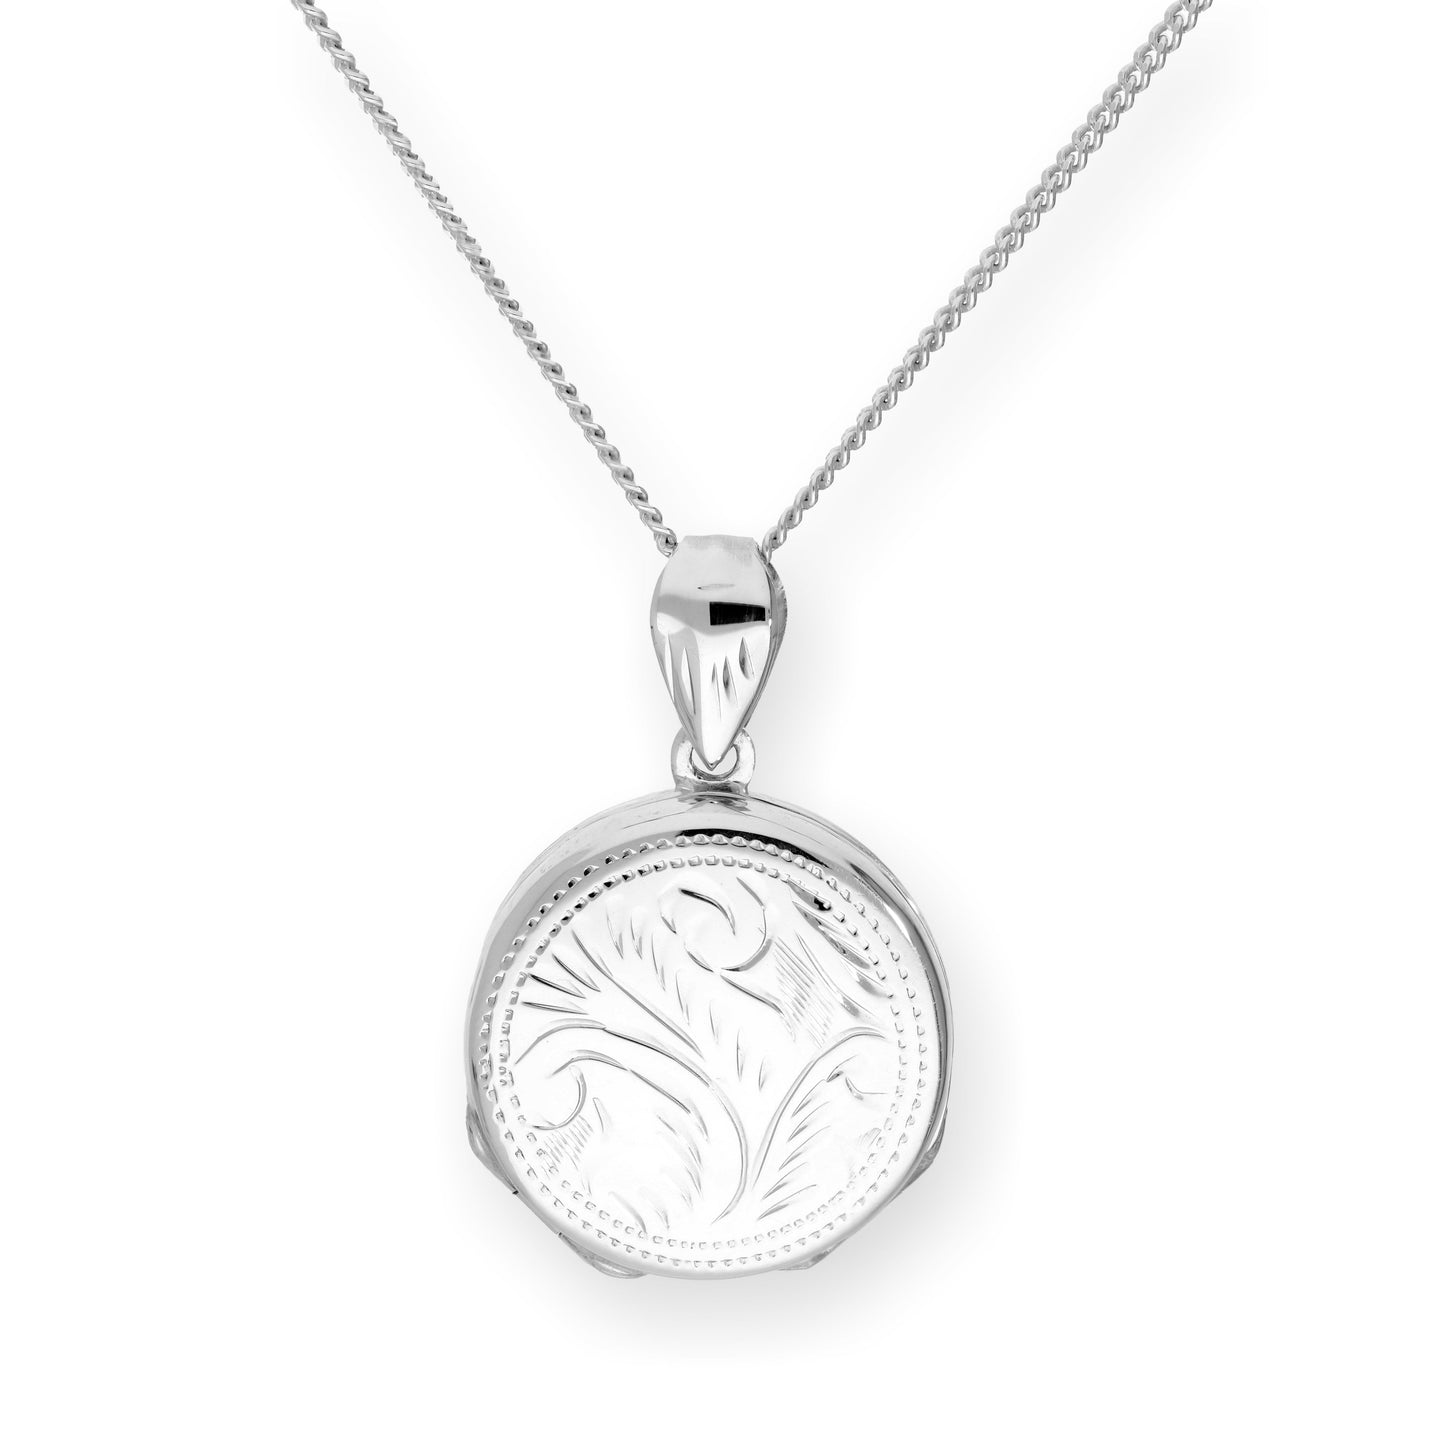 Sterling Silver 4 Photo Engraved Round Family Locket on Chain 16 - 24 Inches